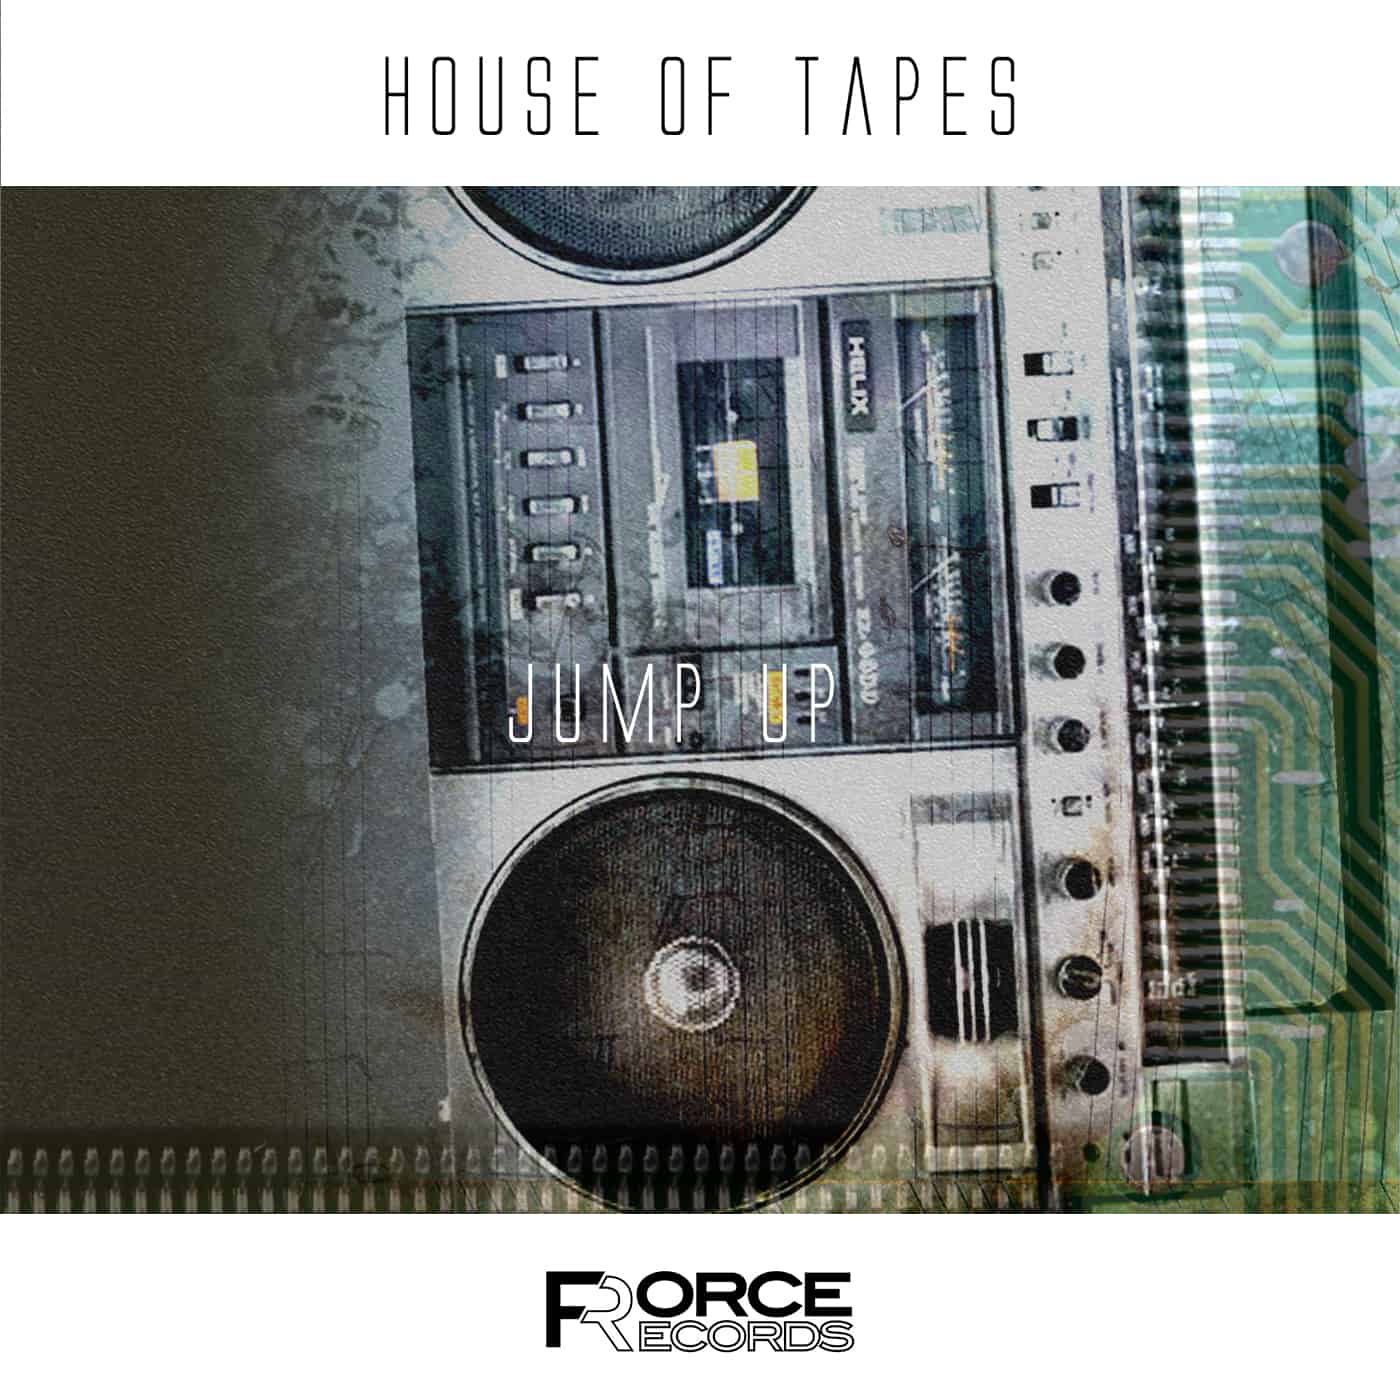 [FreeDownload] House of Tapes “JUMP UP” release from Force Records